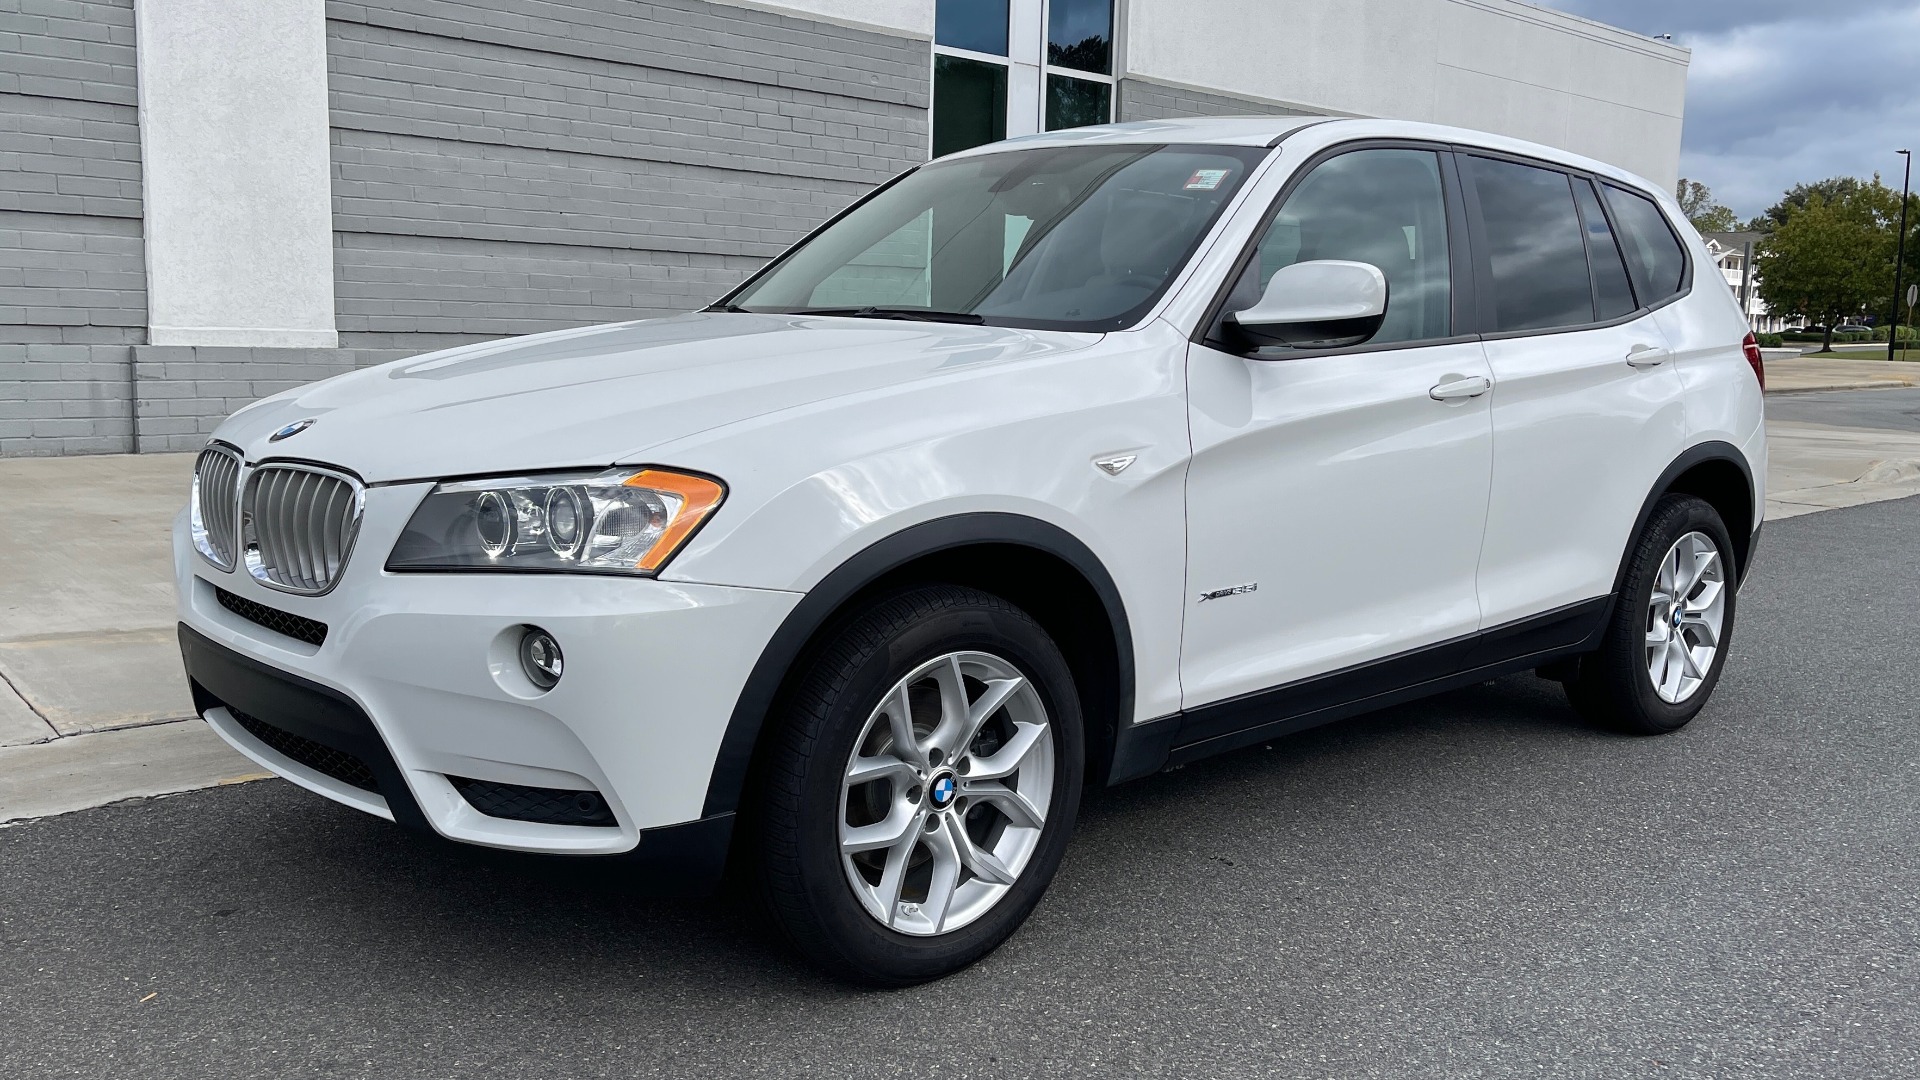 Used 2013 BMW X3 XDRIVE35I PREMIUM / TECHNOLOGY / COLD WTHR / REARVIEW for sale Sold at Formula Imports in Charlotte NC 28227 2